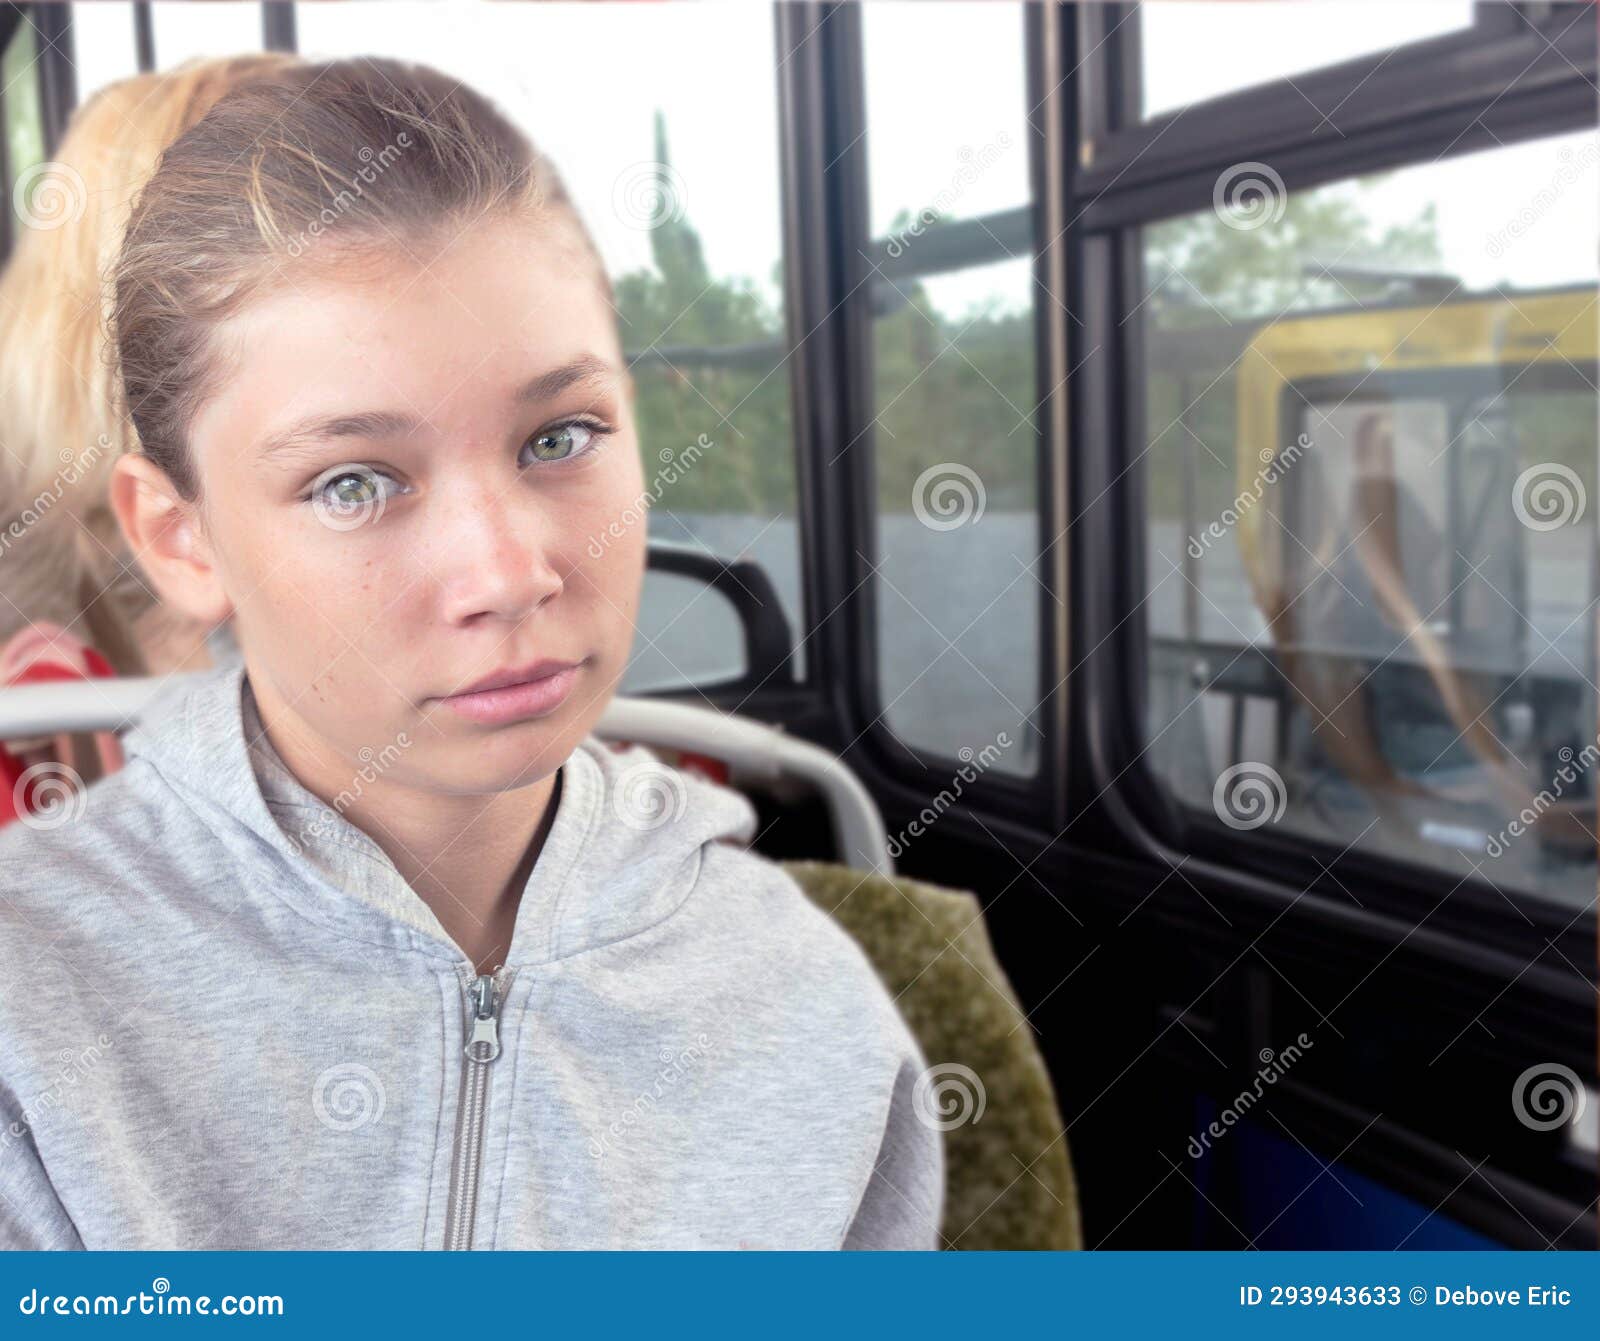 Pretty Young Girl Or College Girl In Public Transport Stock Image 